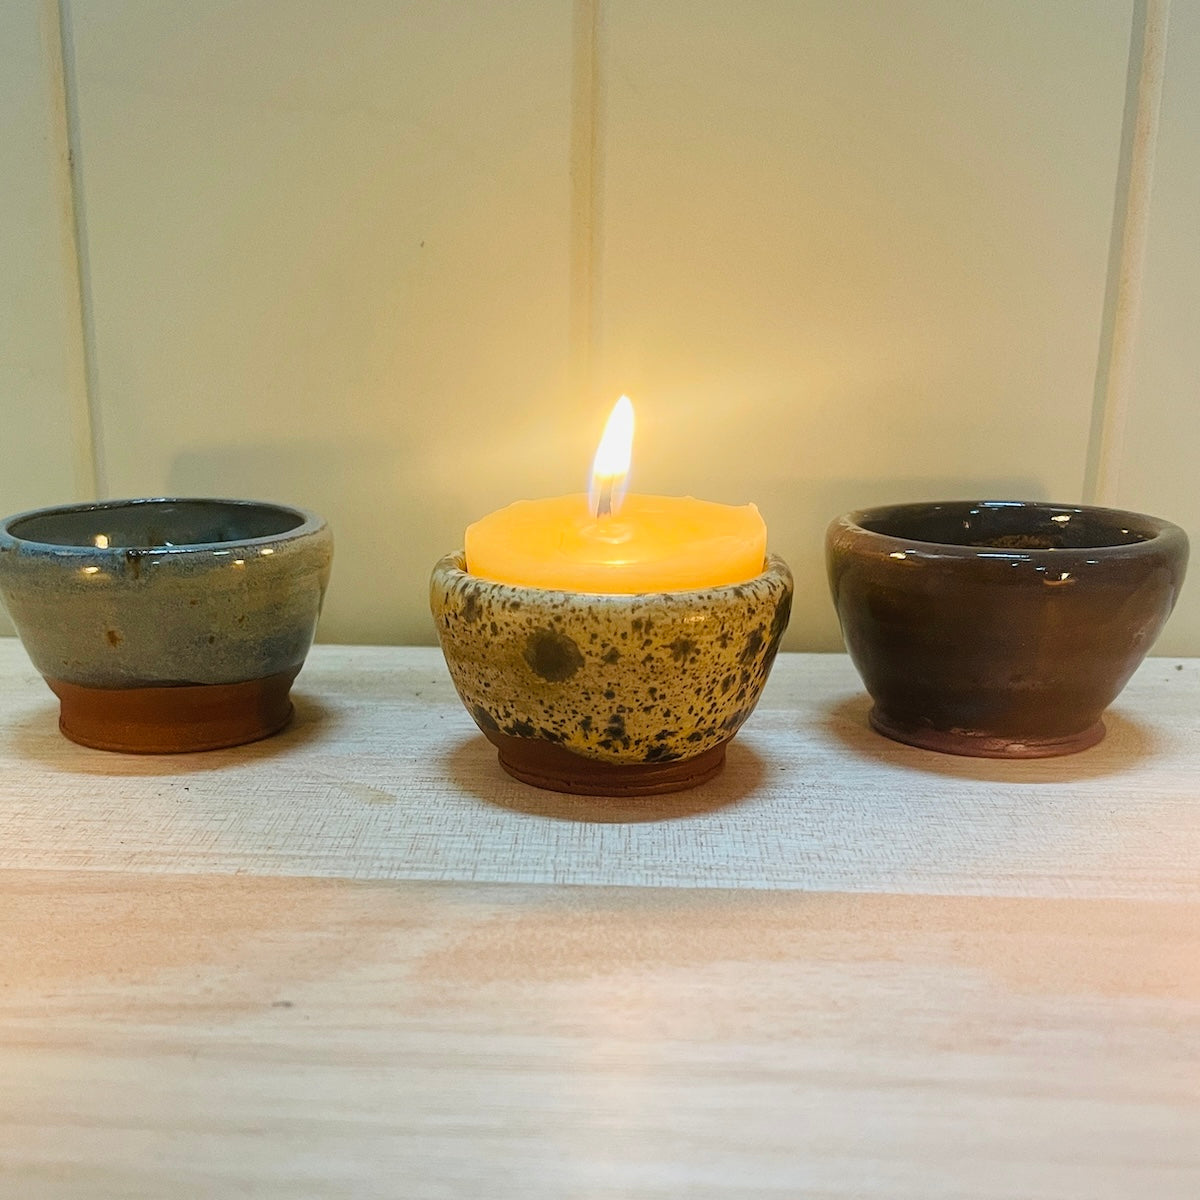 3 x Beeswax ceramic holders from Happy Flame lit